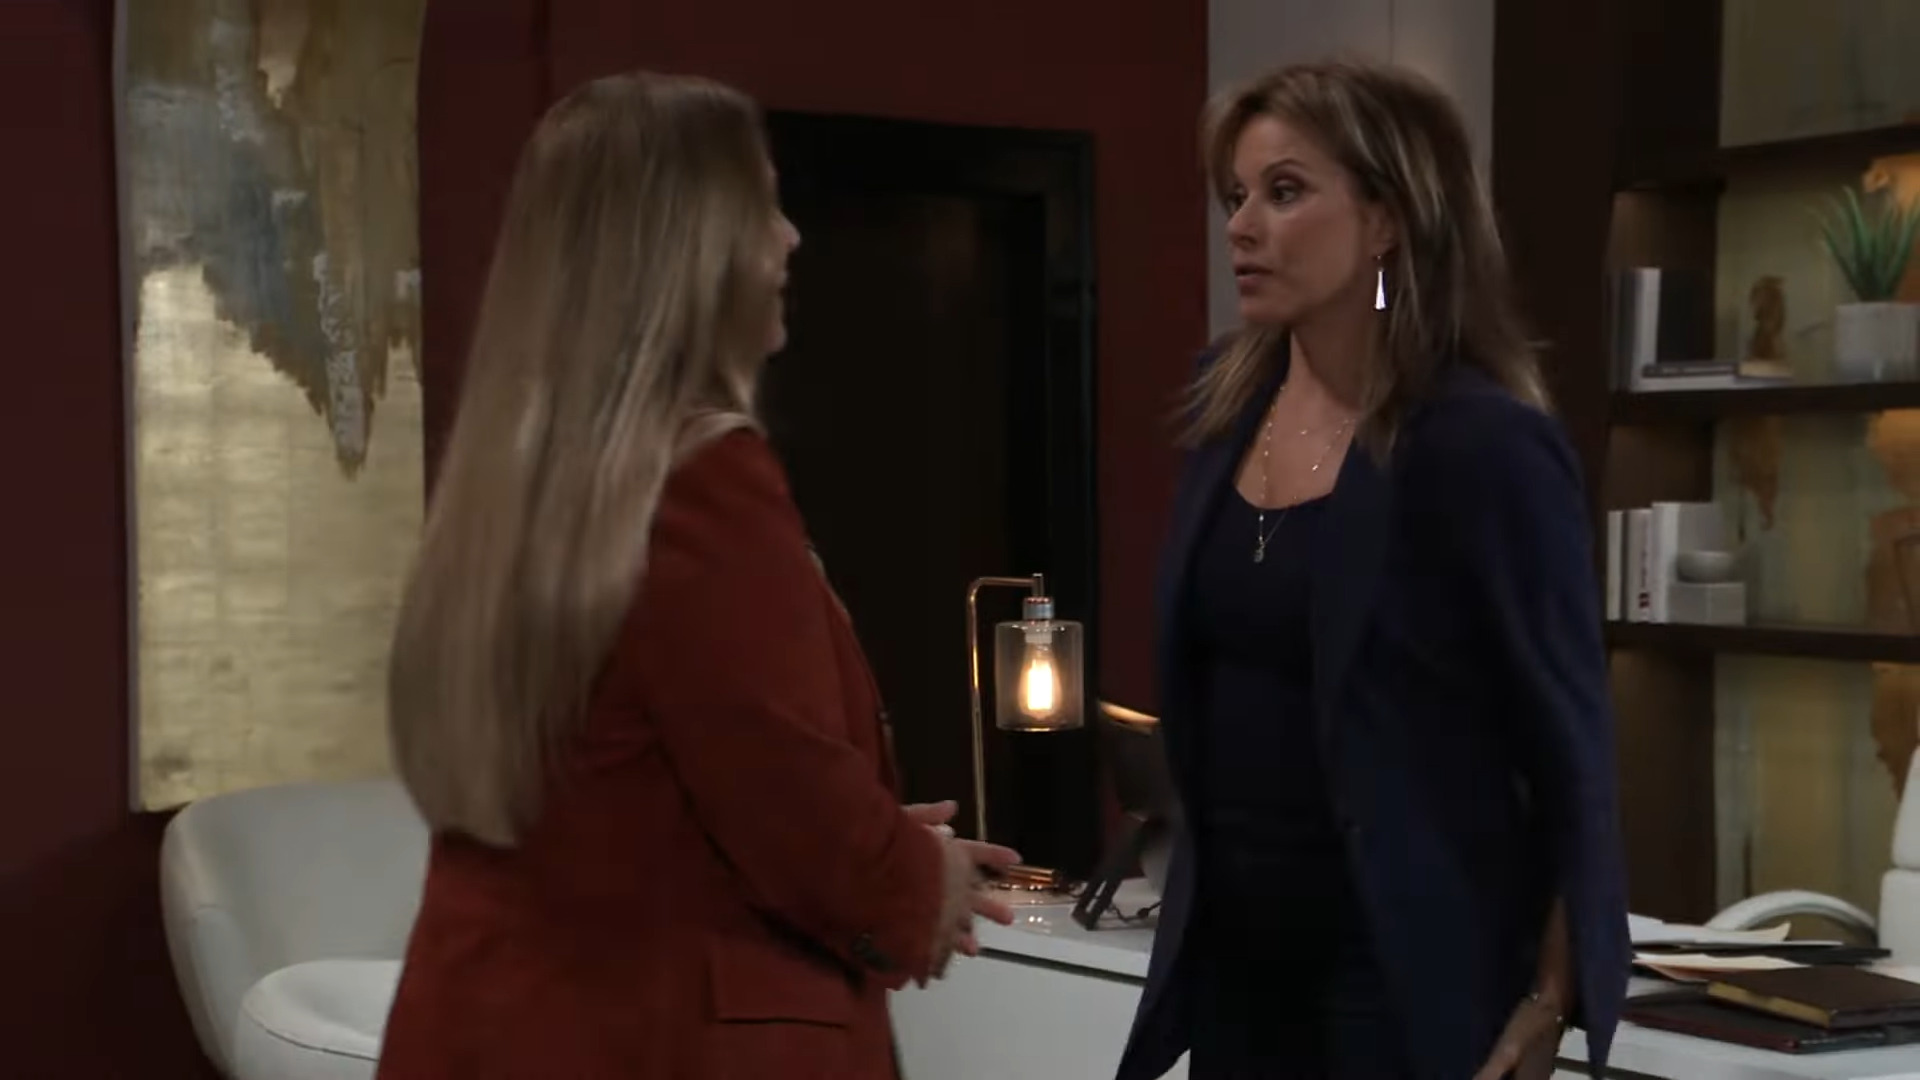 alexis meets with laura